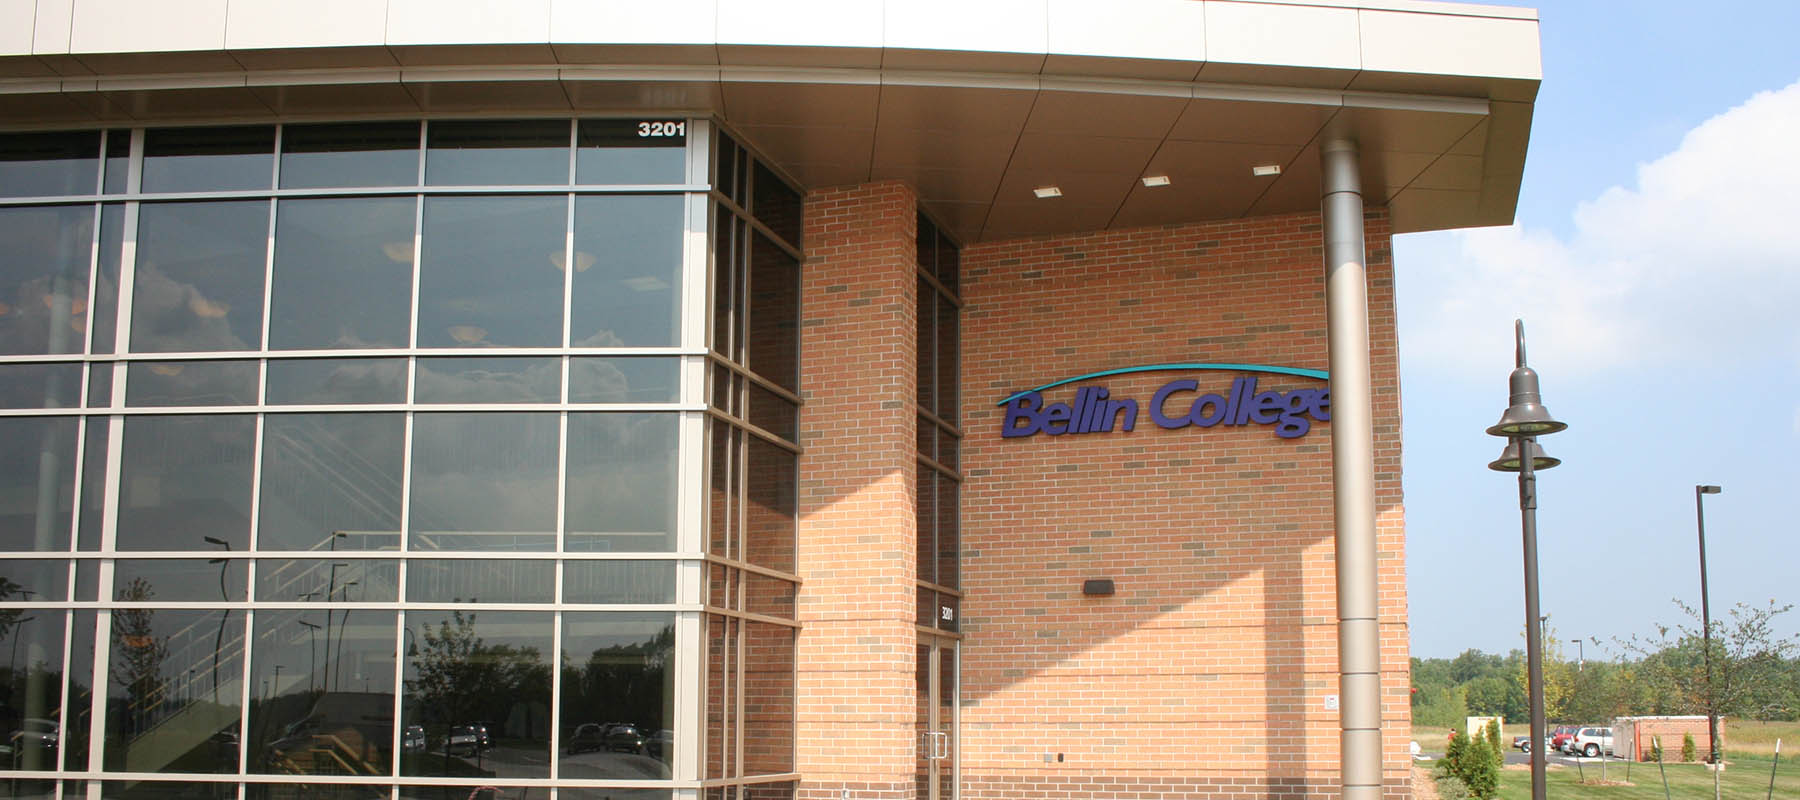 Exterior and main entrance of Bellin College